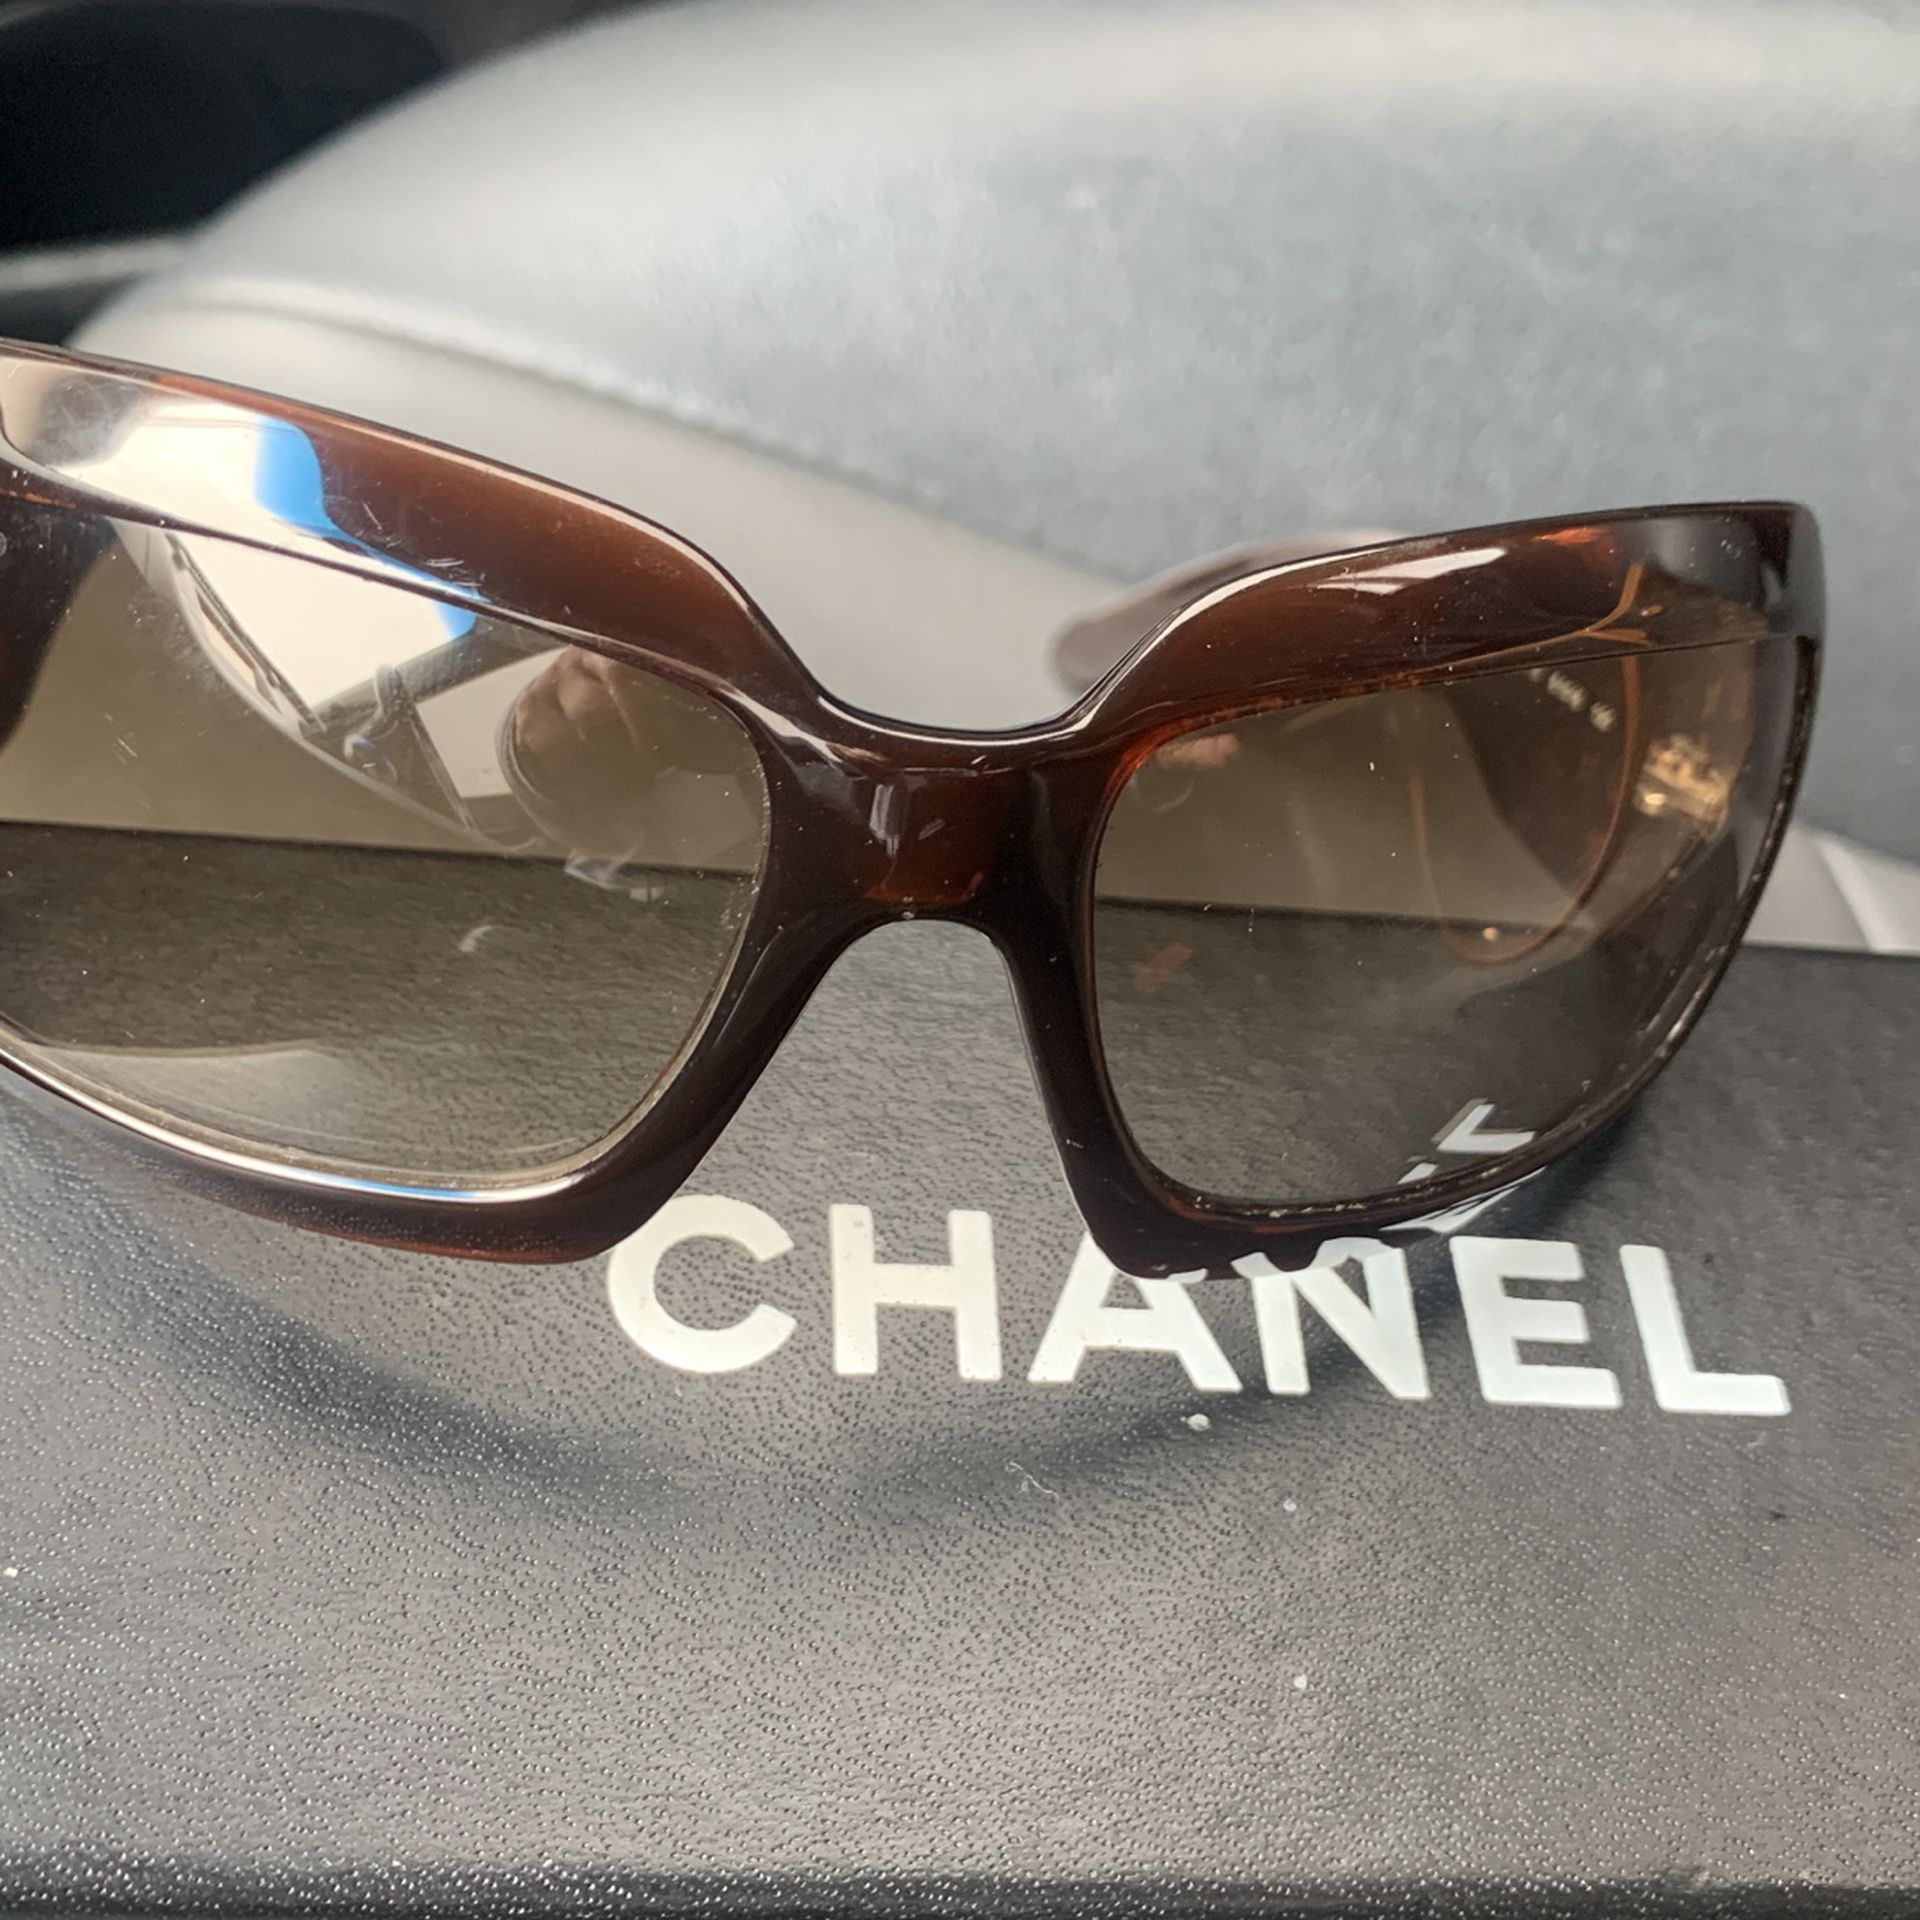 Chanel Mother Of pearl Sunglasses for Sale in Laguna Beach, CA - OfferUp